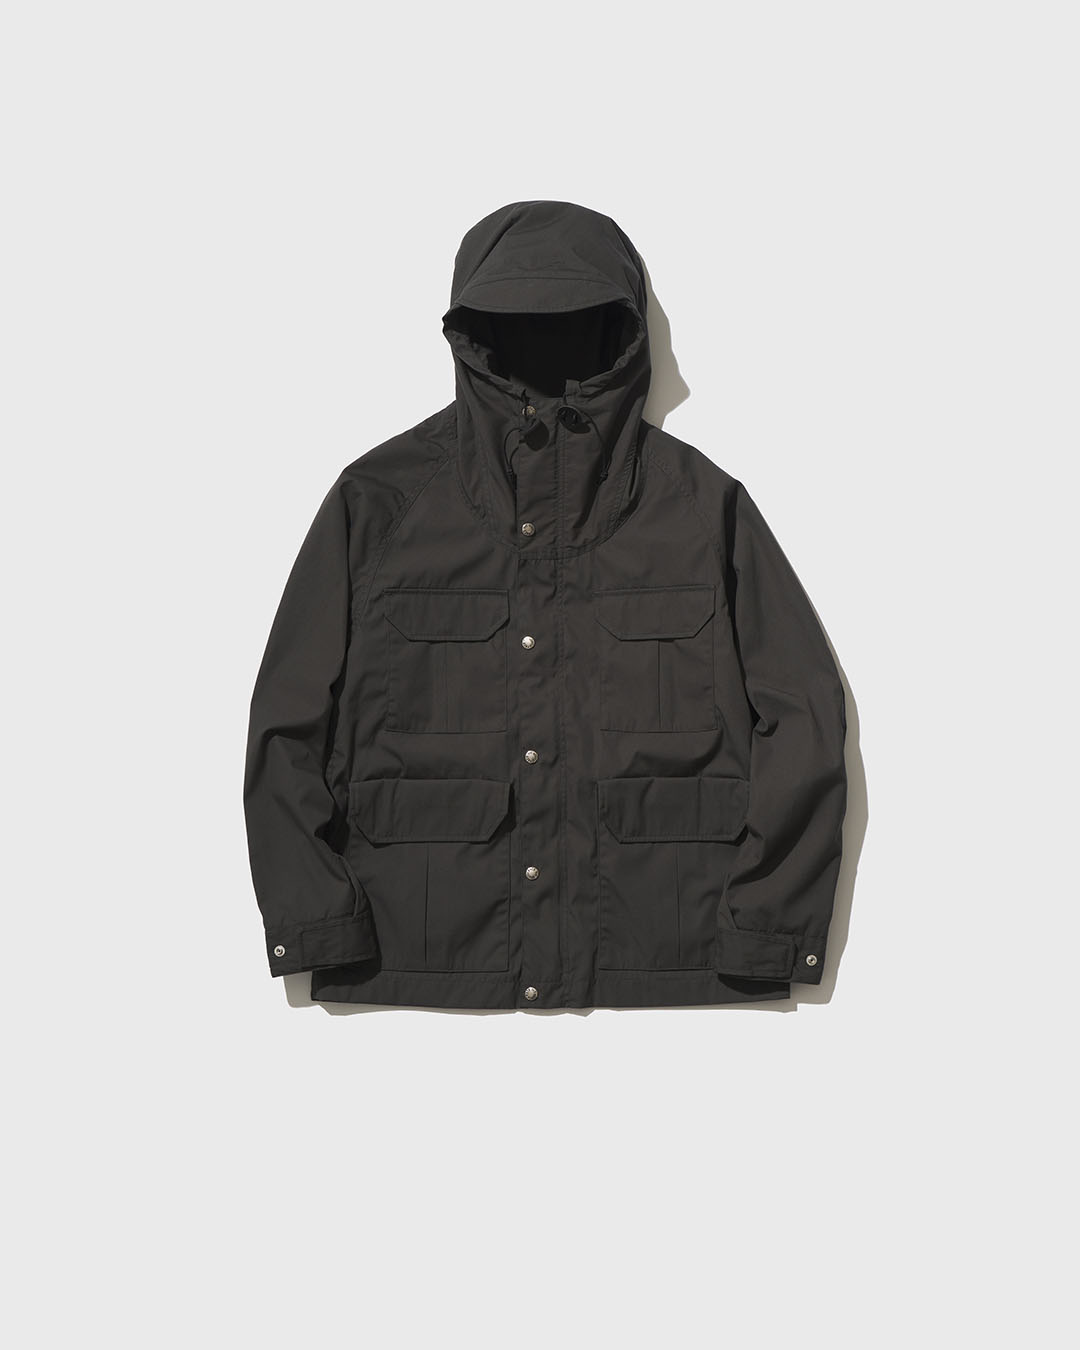 THE NORTH FACE PURPLE LABEL / Featured Product vol.33